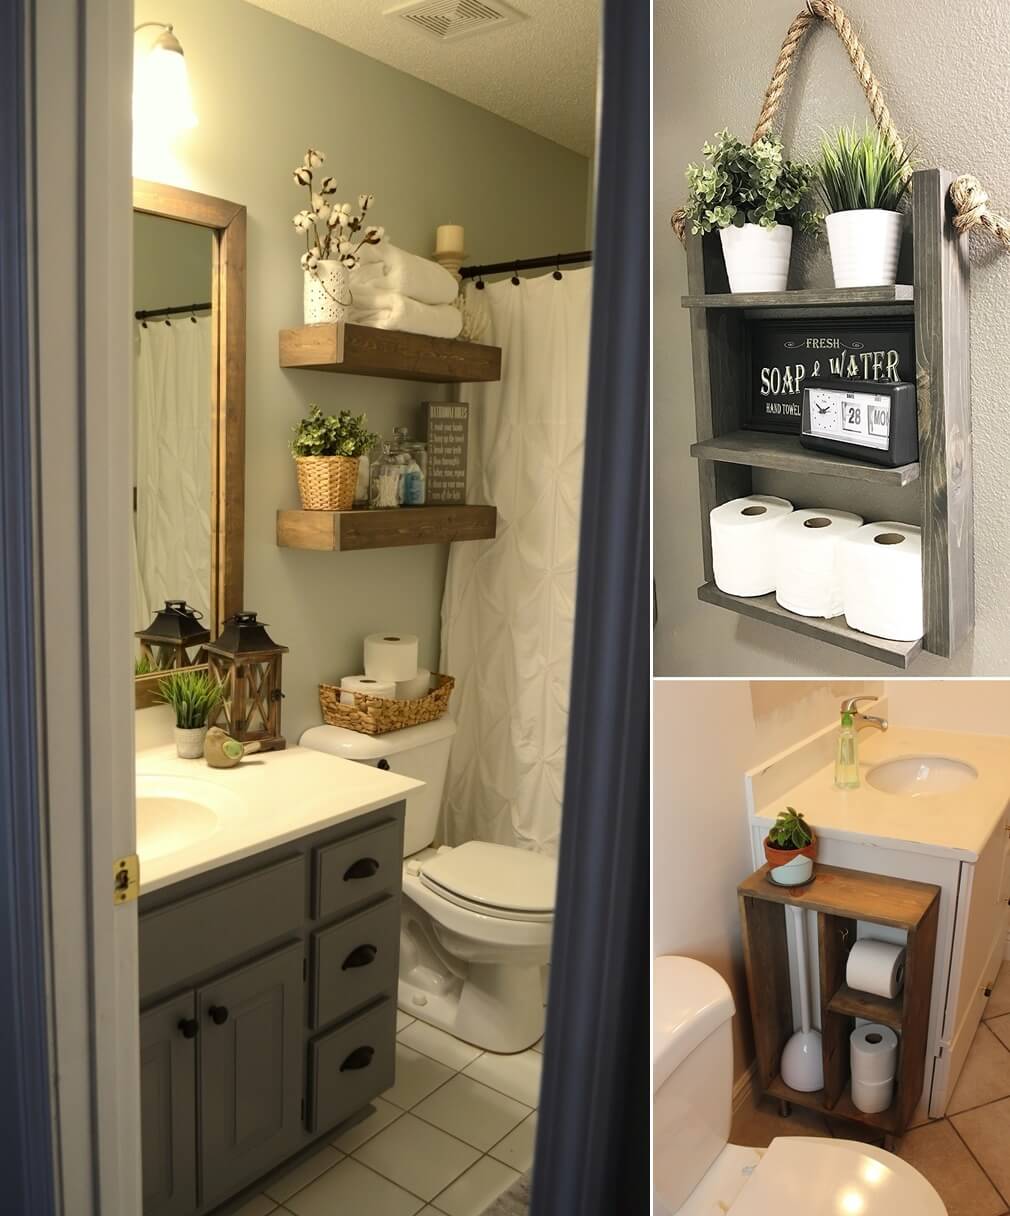 10 DIY Wood Projects for Your Bathroom